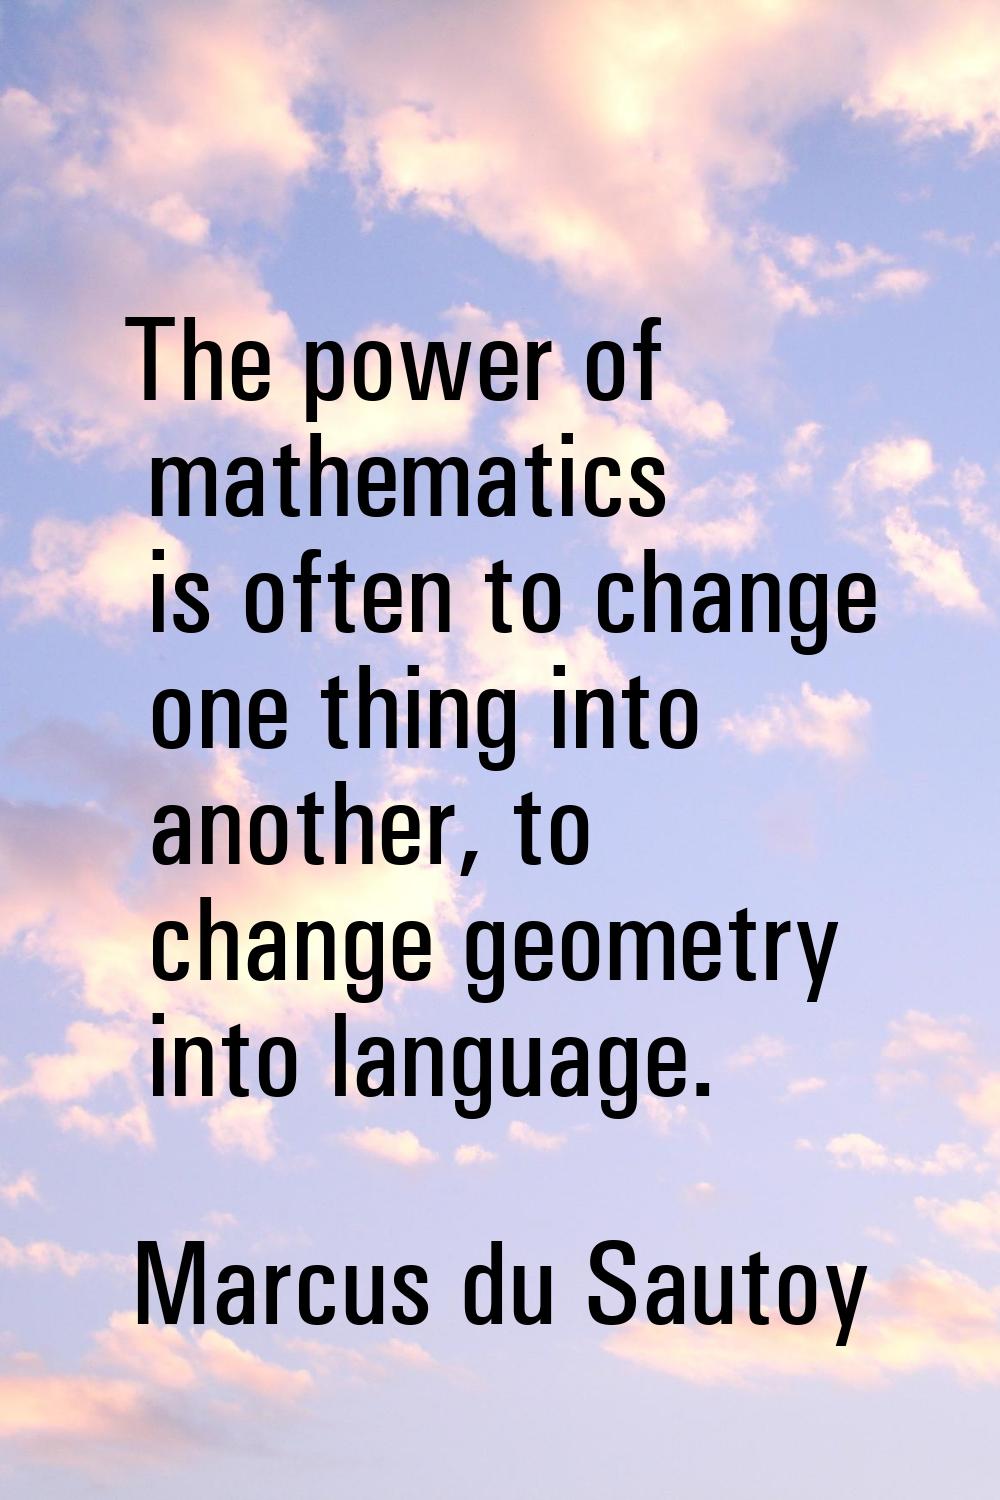 The power of mathematics is often to change one thing into another, to change geometry into languag